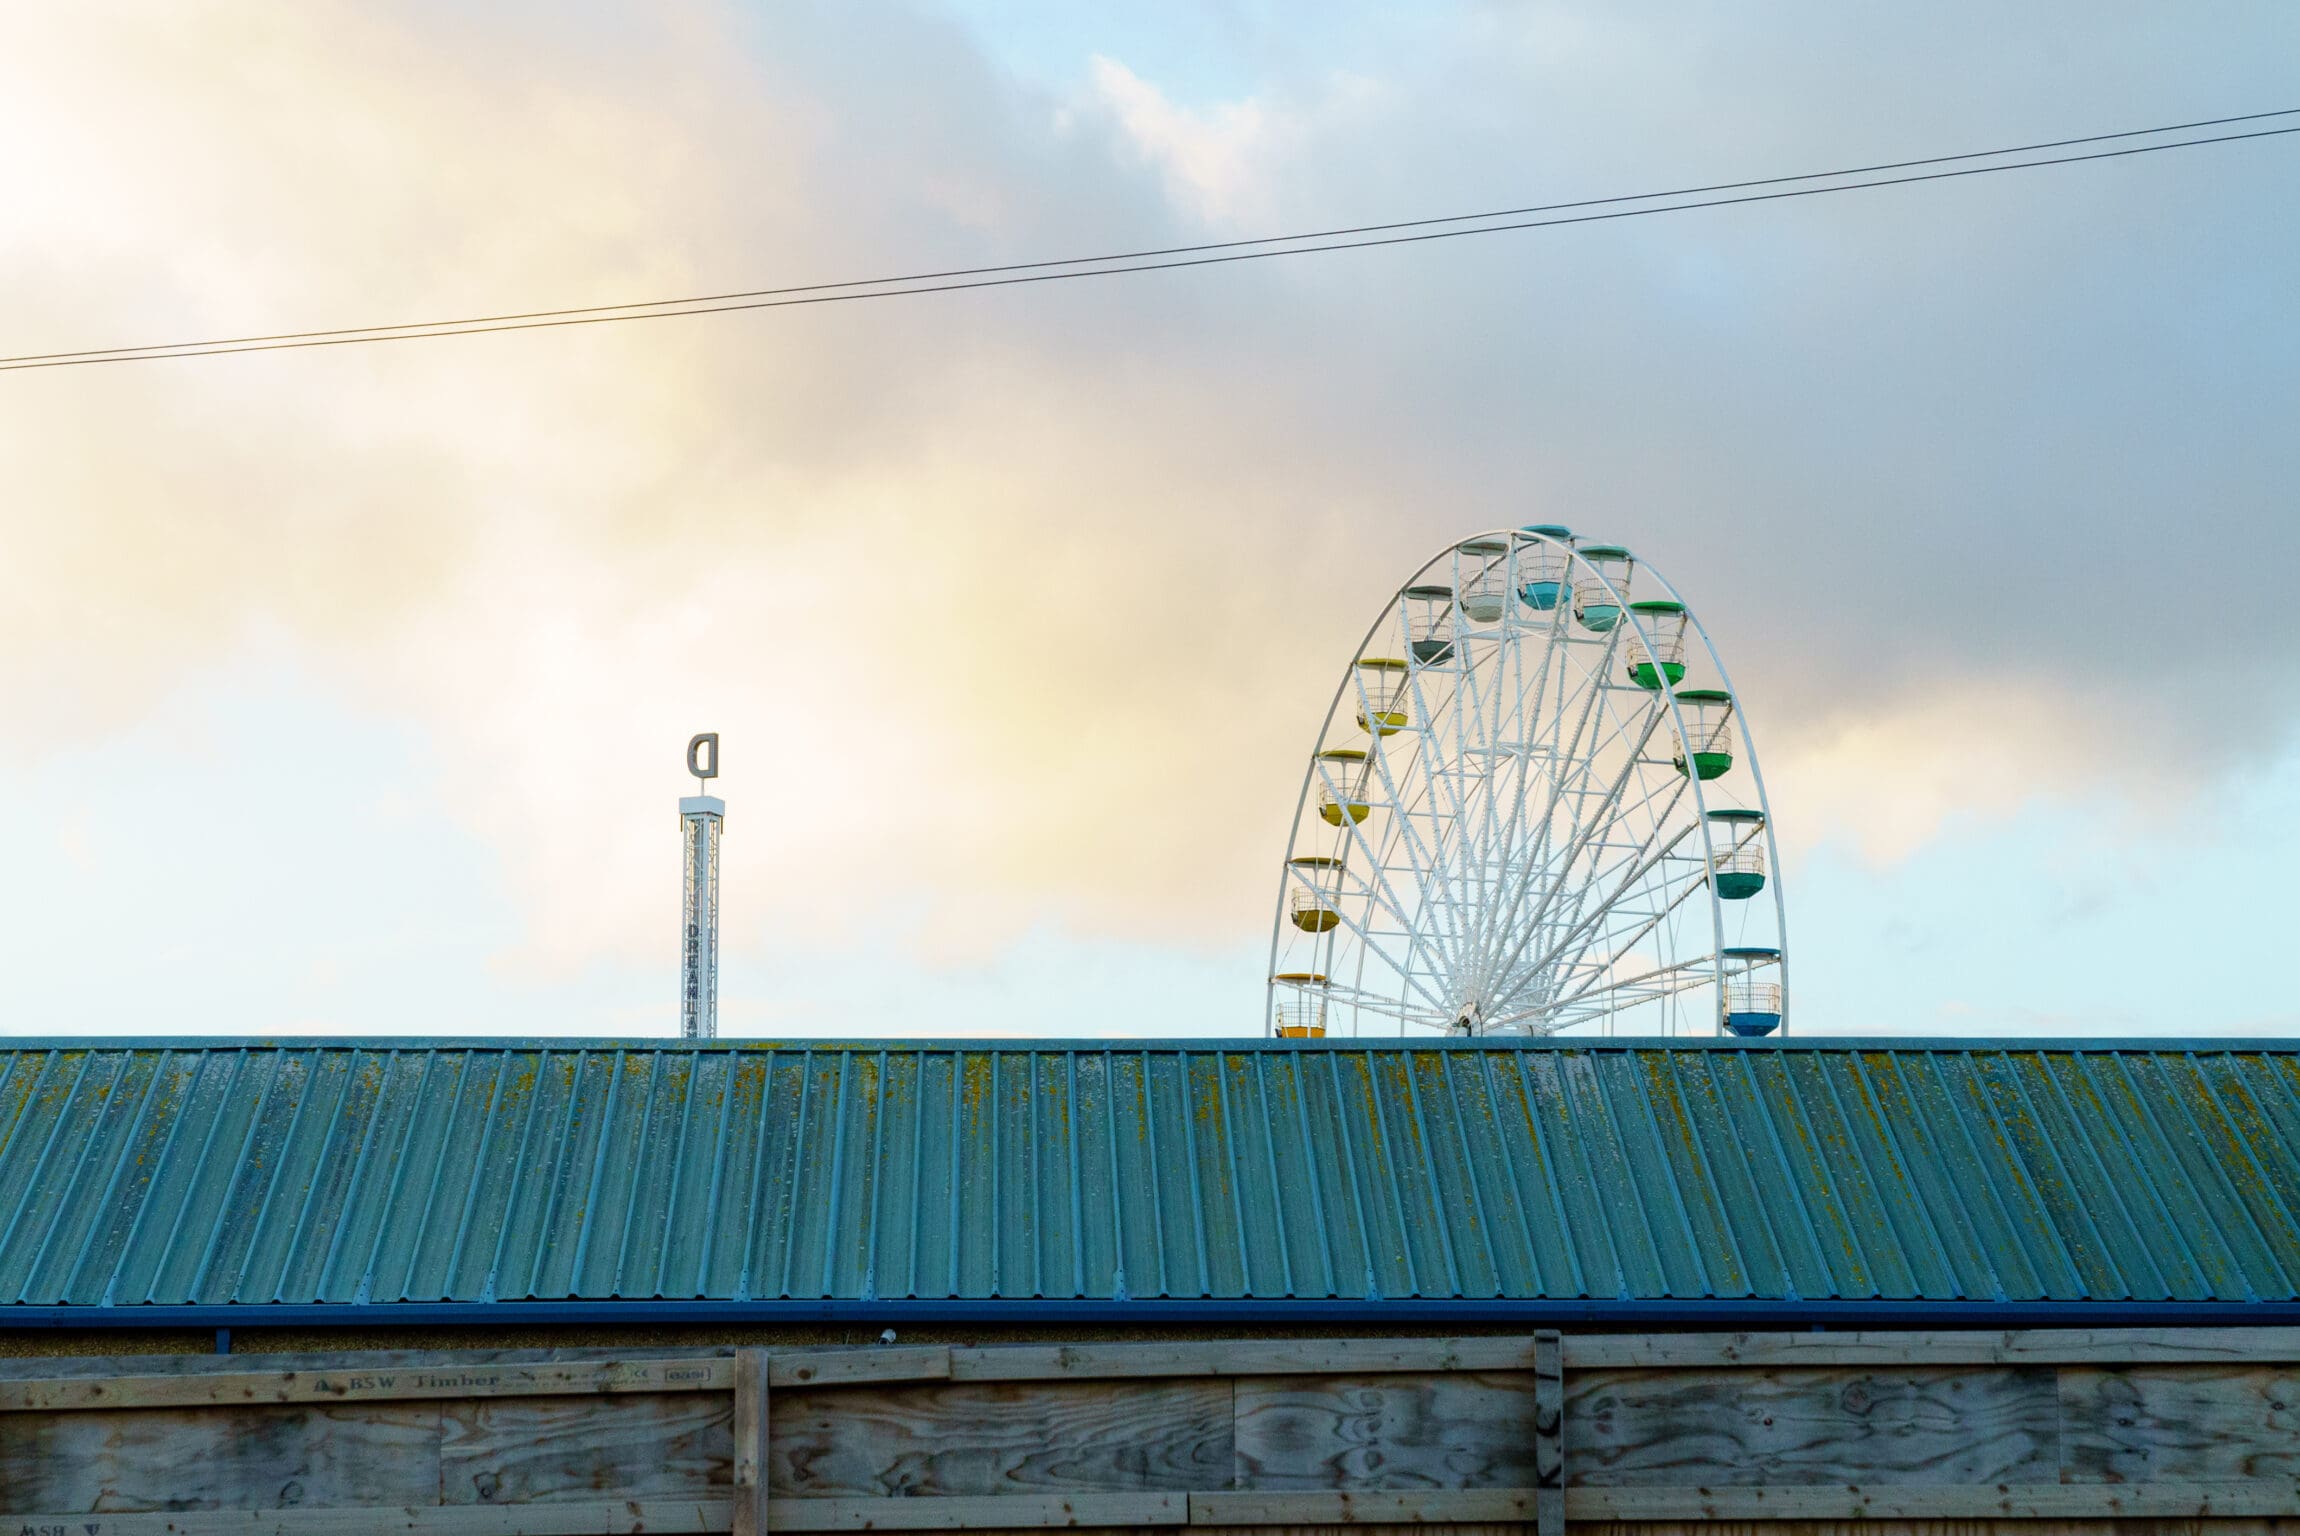 An alternative literary tour of the Kent coastline | A ferris wheel peering above a blue metal roof in Margate